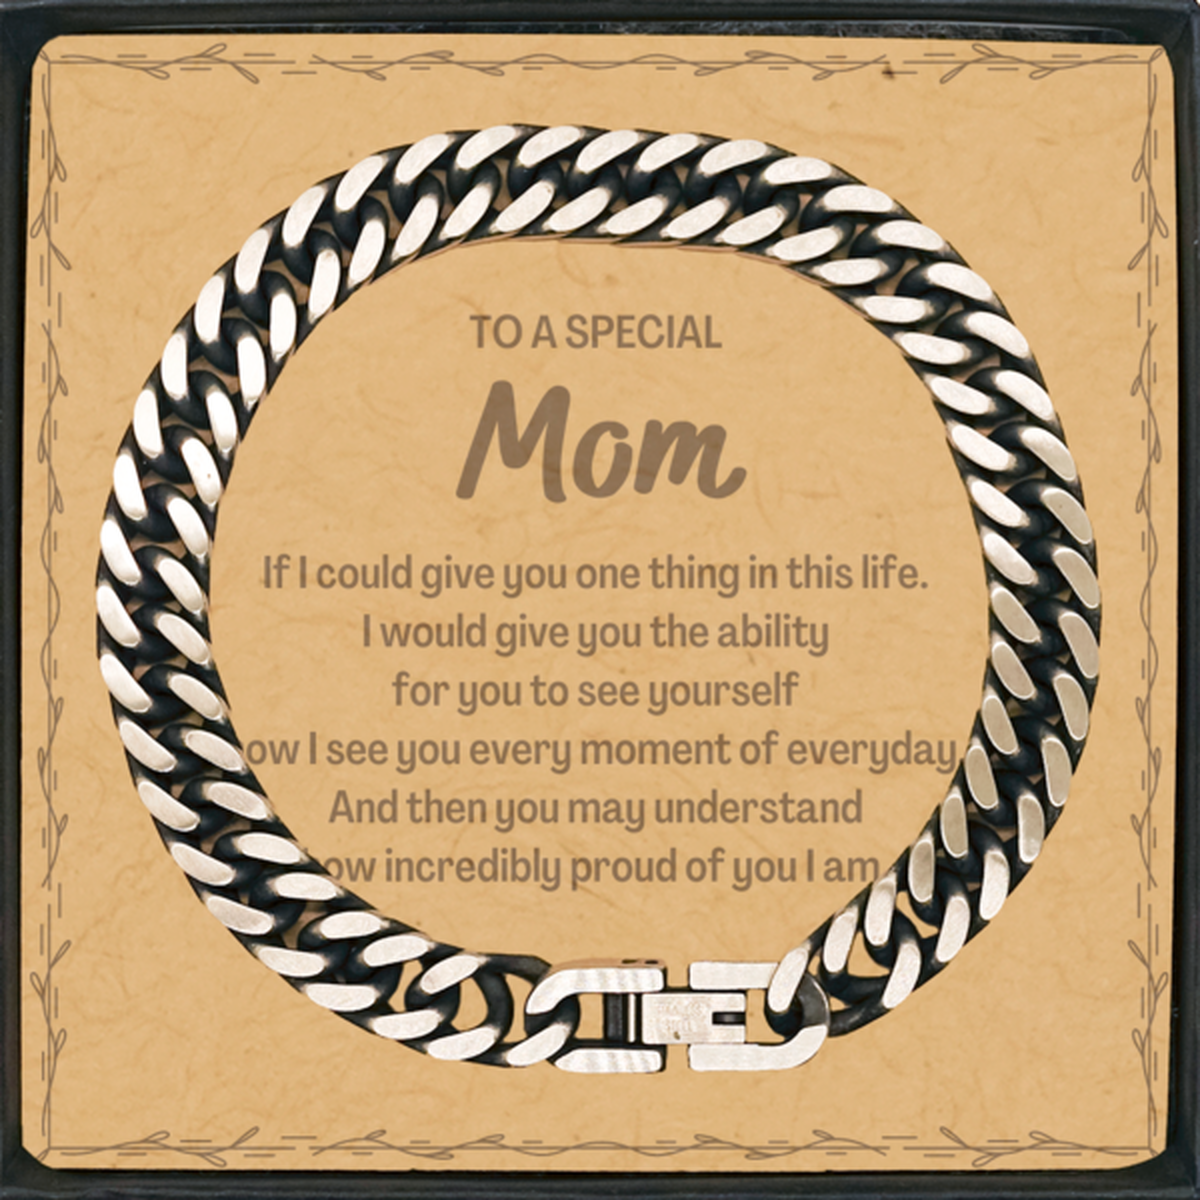 To My Mom Cuban Link Chain Bracelet, Gifts For Mom Message Card, Inspirational Gifts for Christmas Birthday, Epic Gifts for Mom To A Special Mom how incredibly proud of you I am